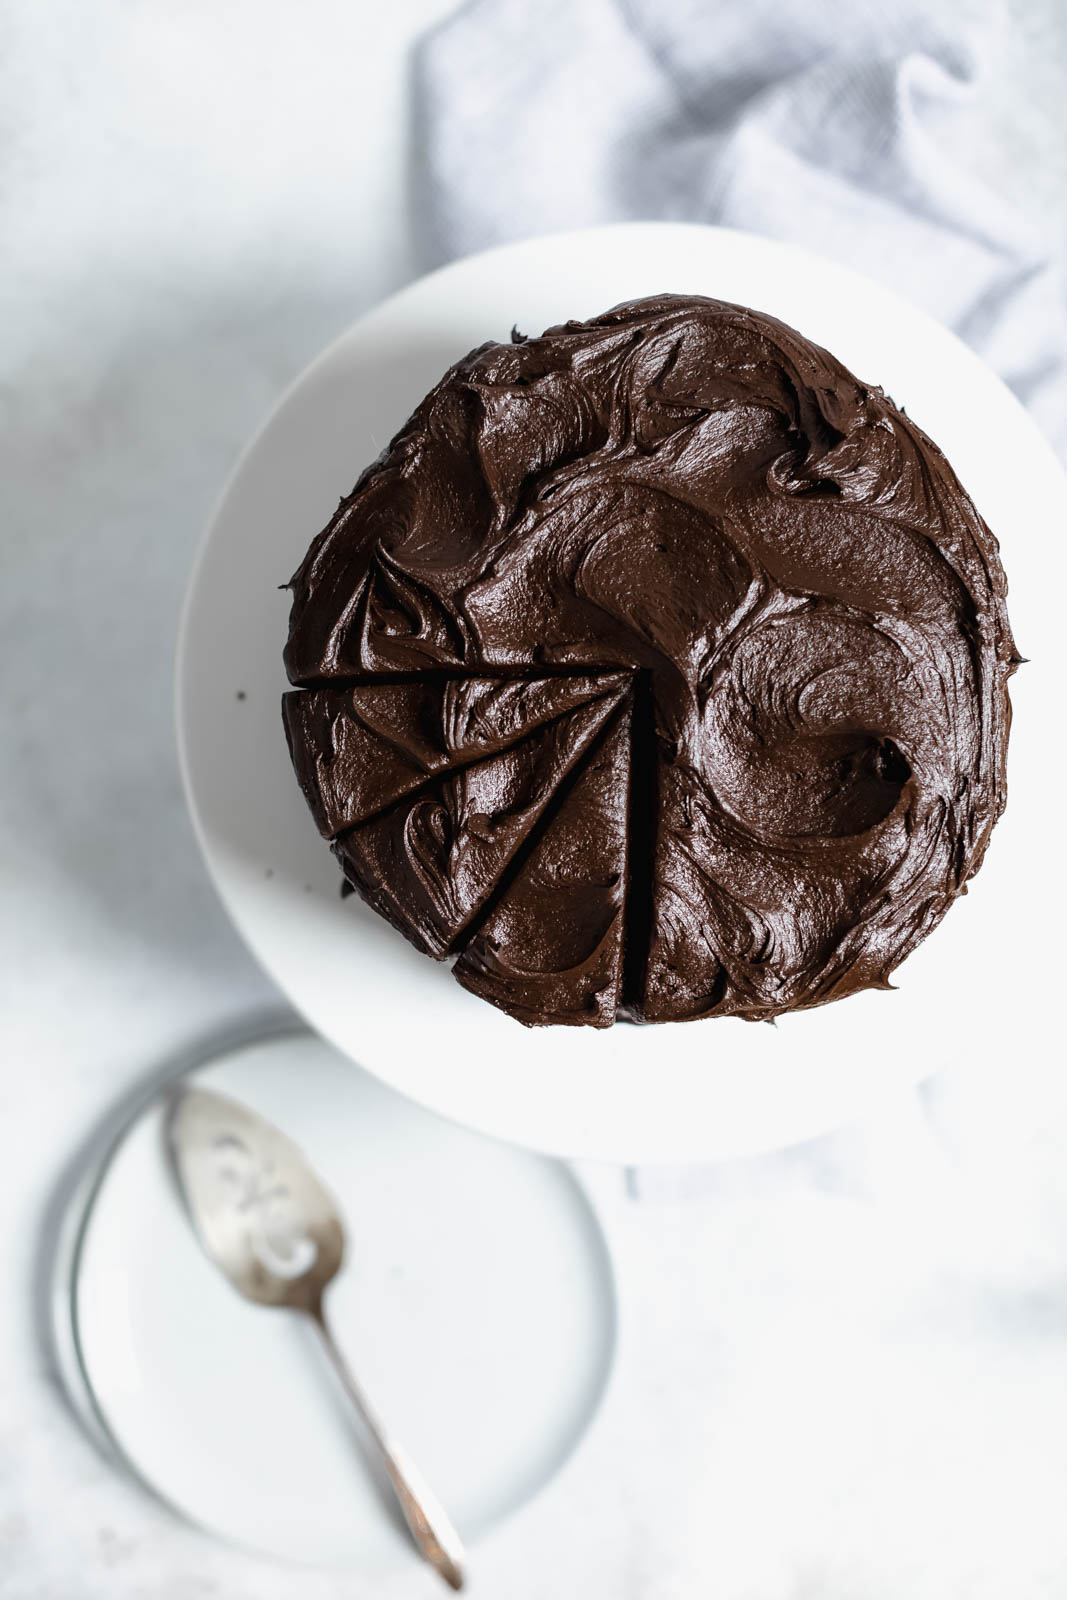 The Blackout Chocolate Cake to end all other chocolate cakes. Aka a moist as heck chocolate cake with a sinful chocolate buttercream frosting.